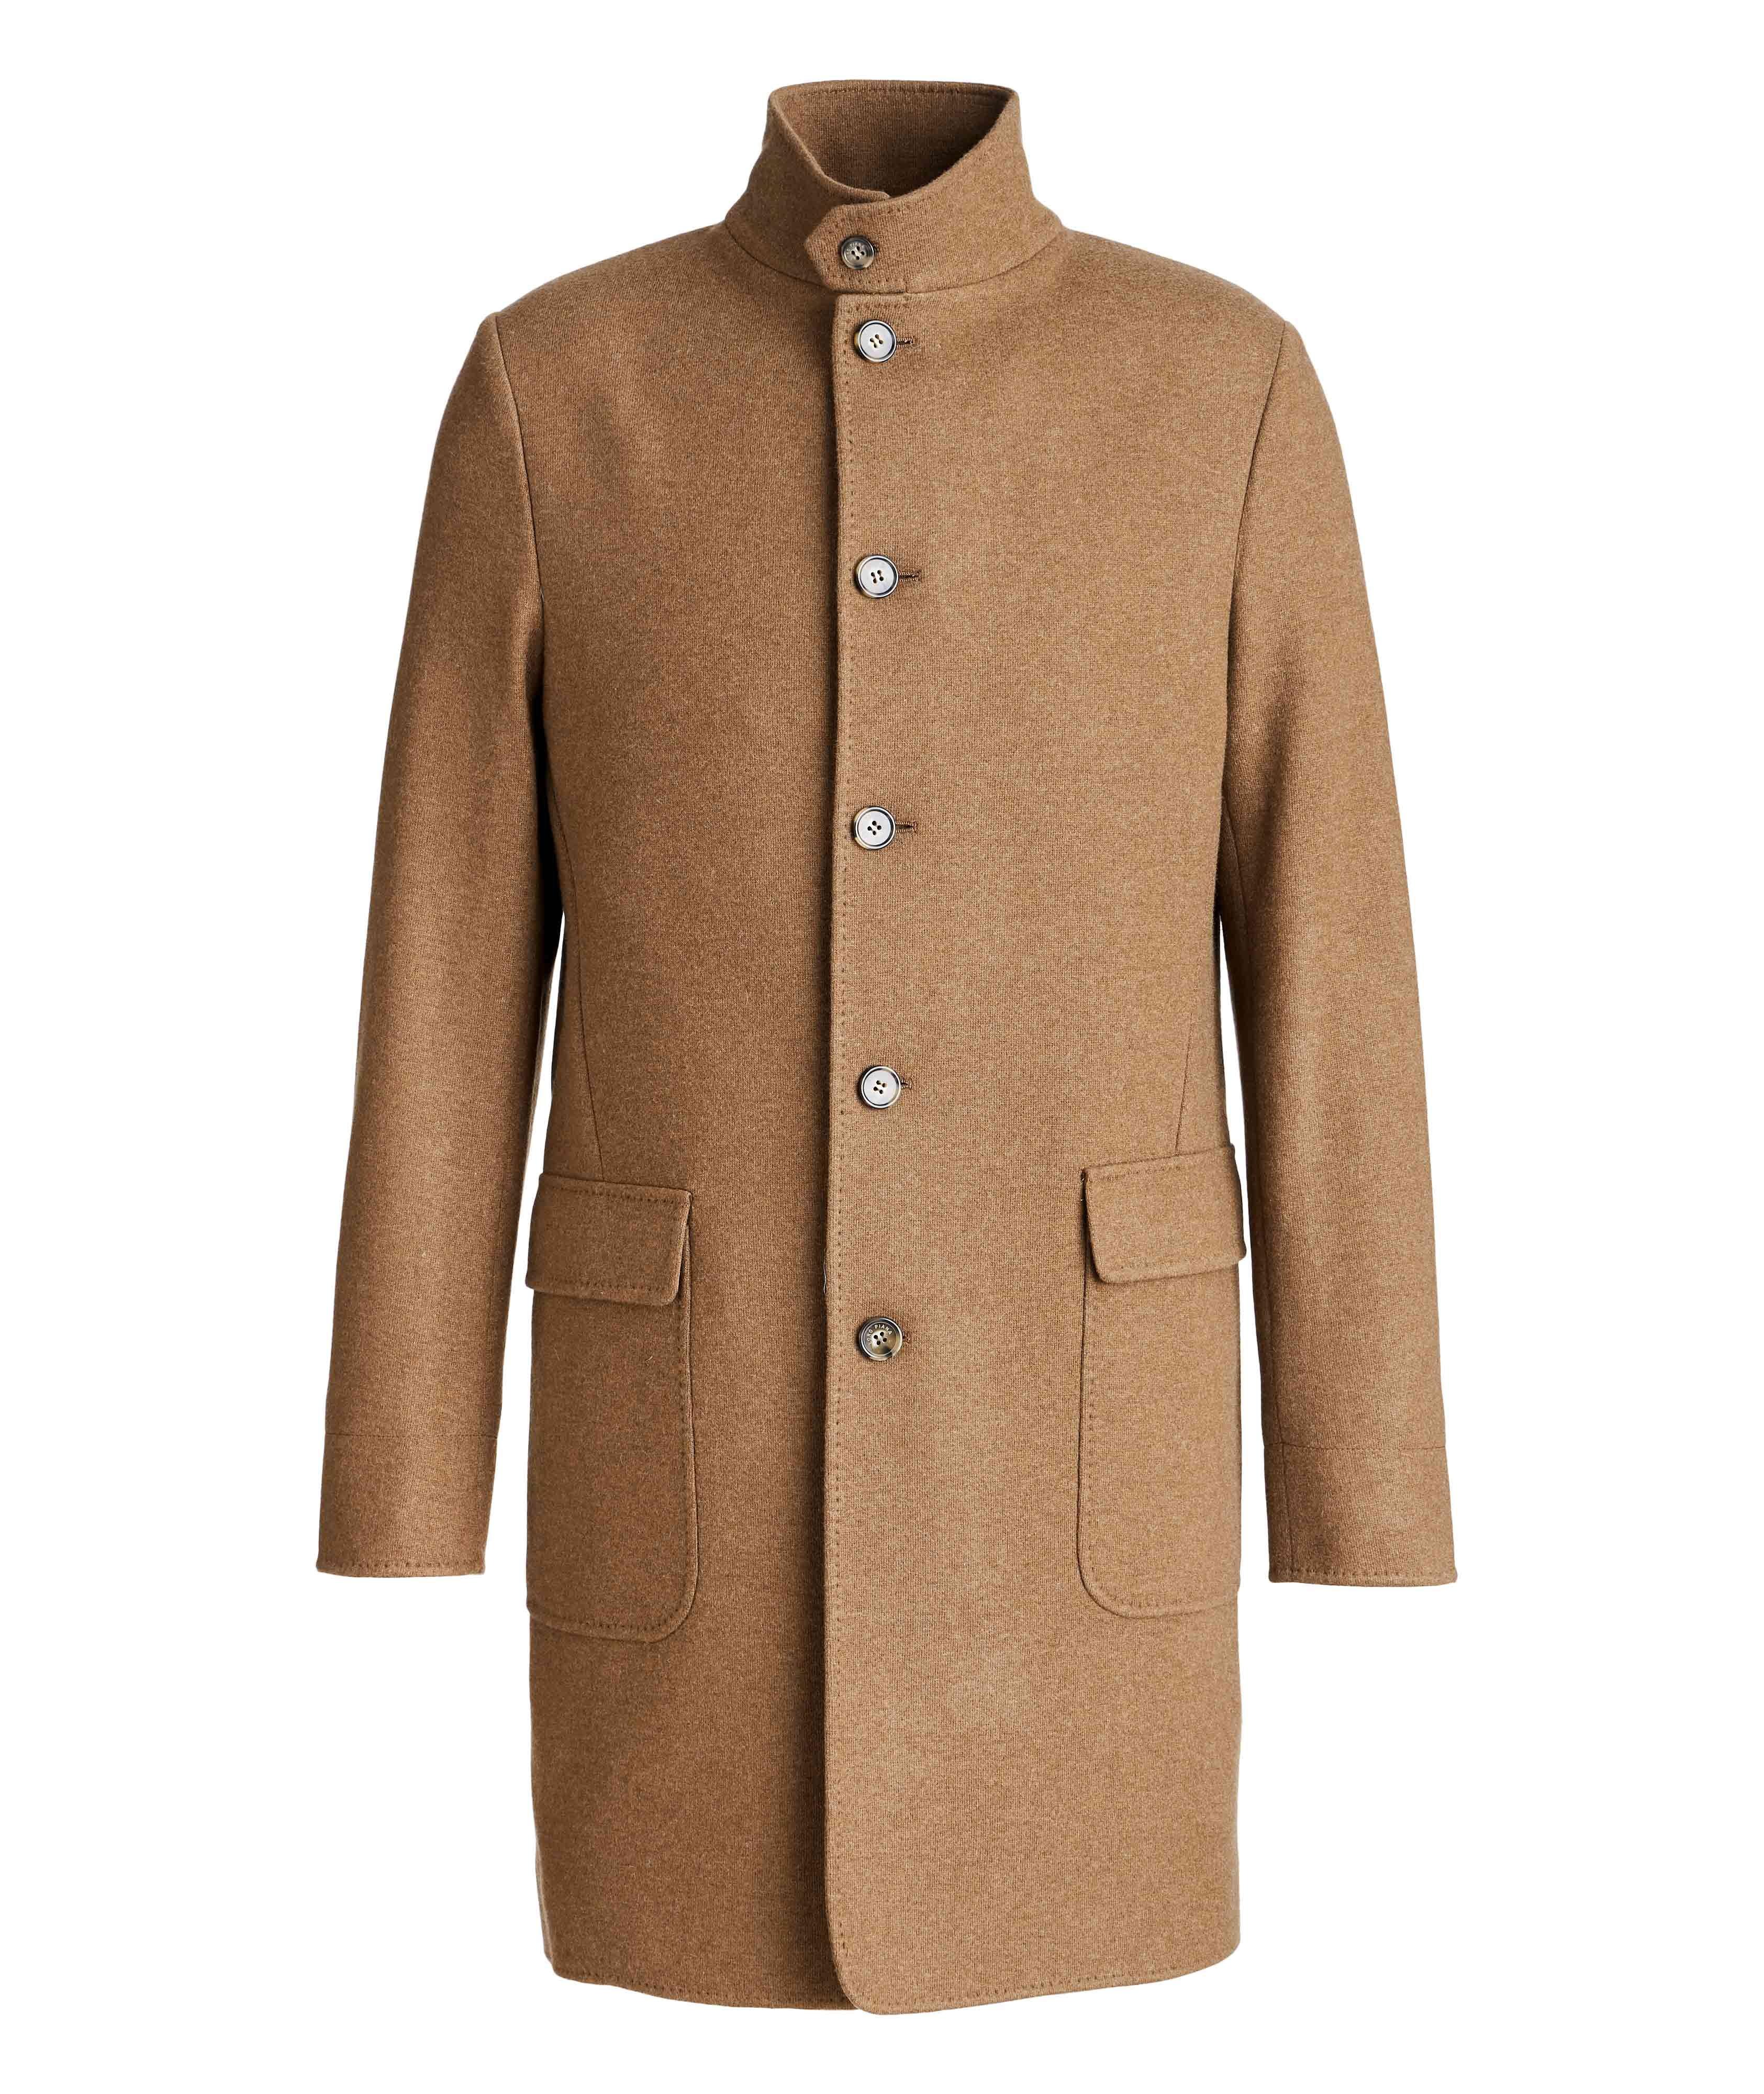 Unstructured Cashmere Overcoat image 0